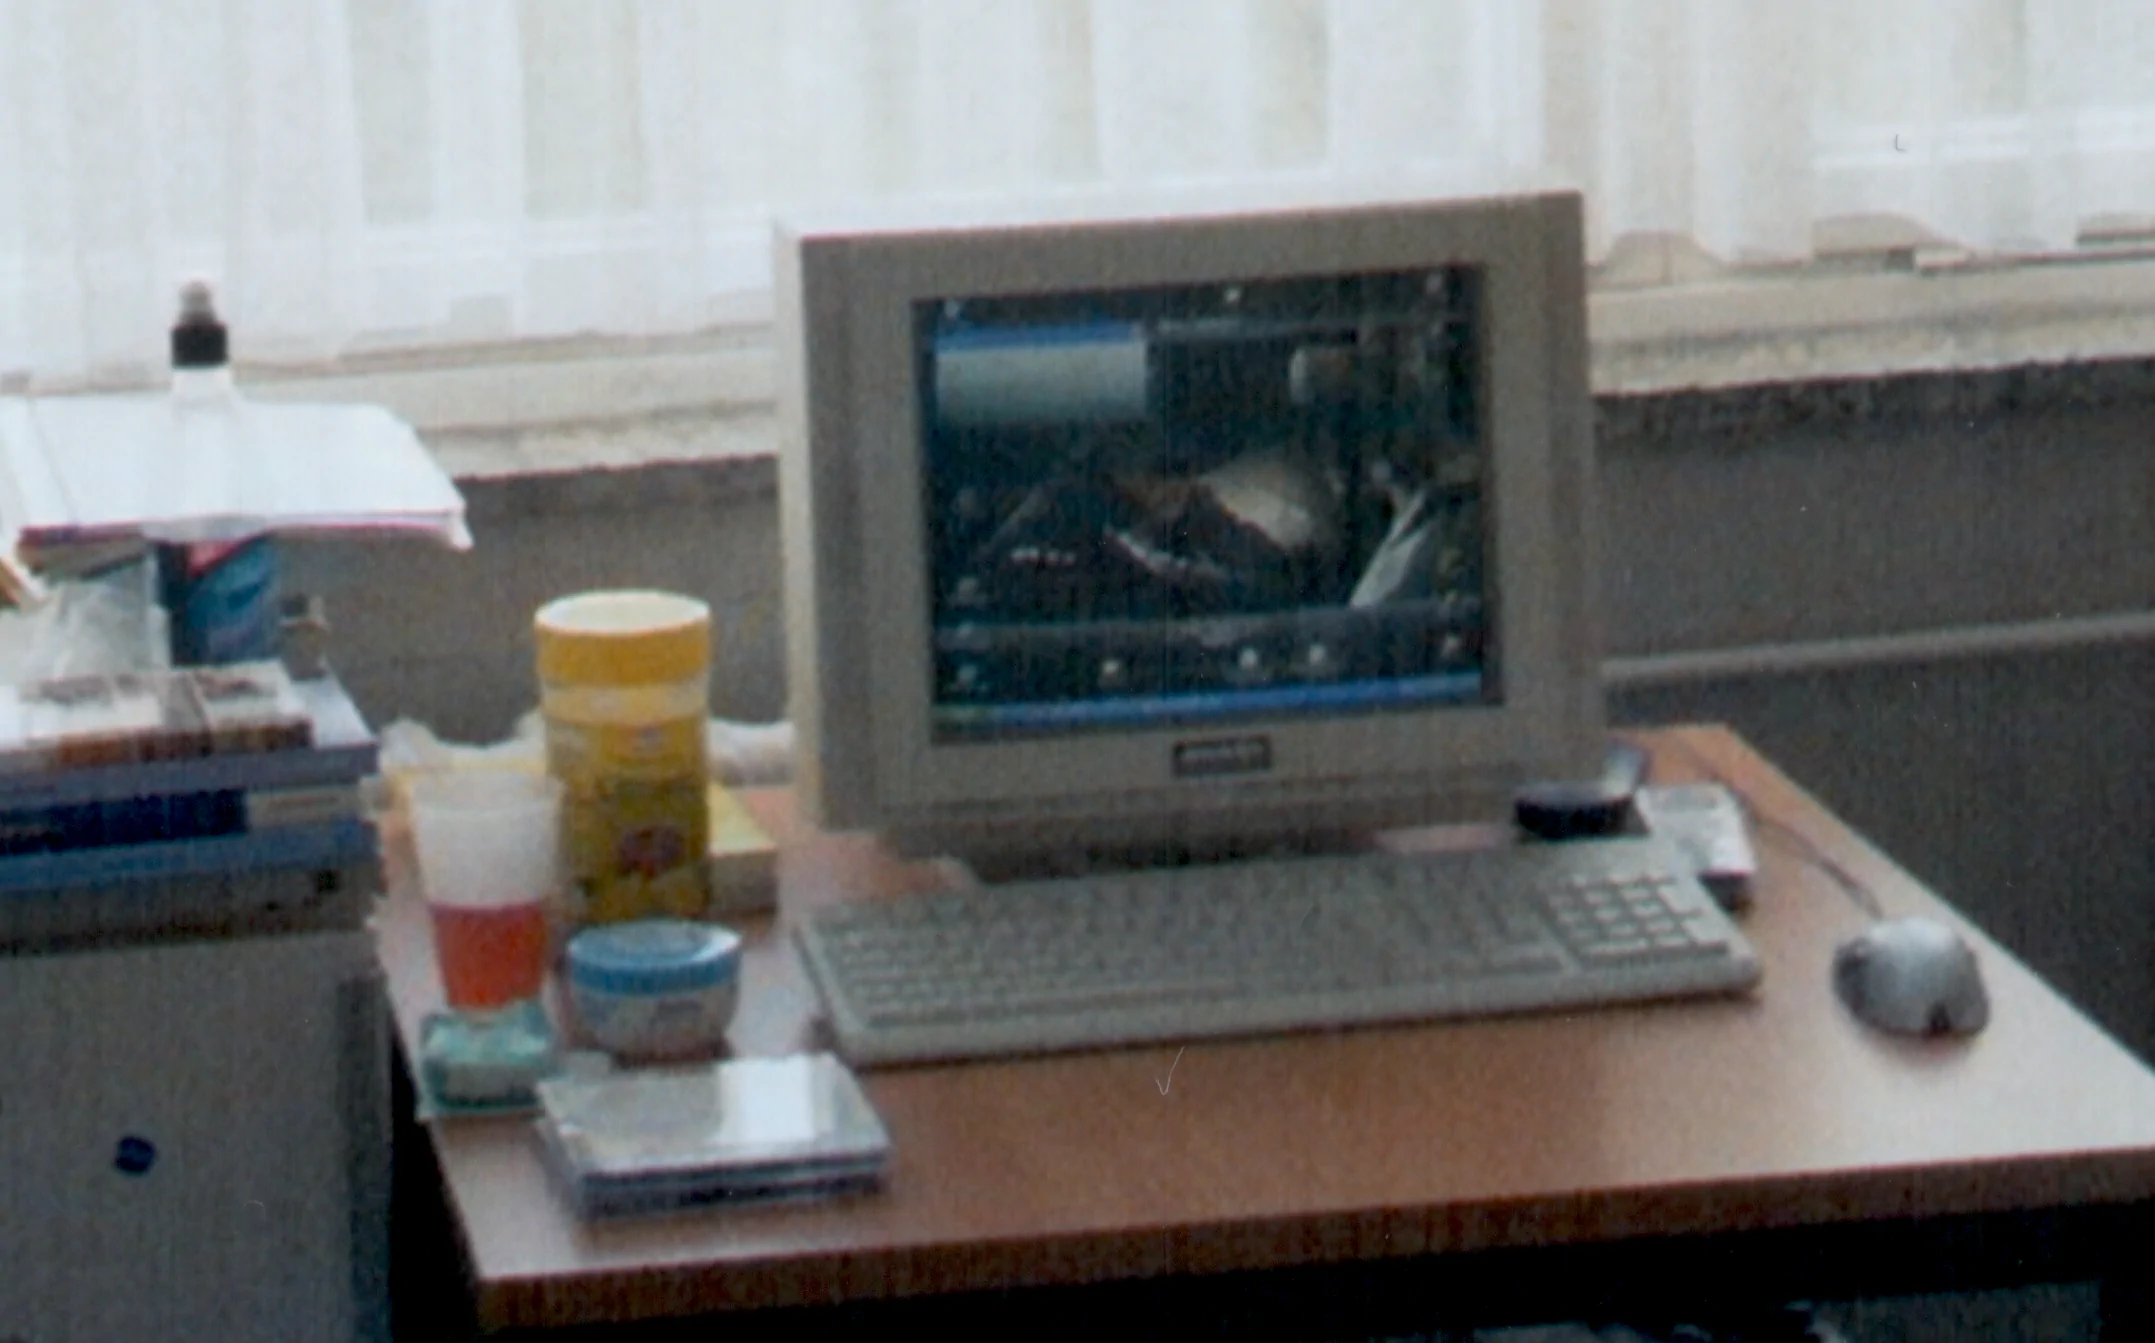 old computer monitor